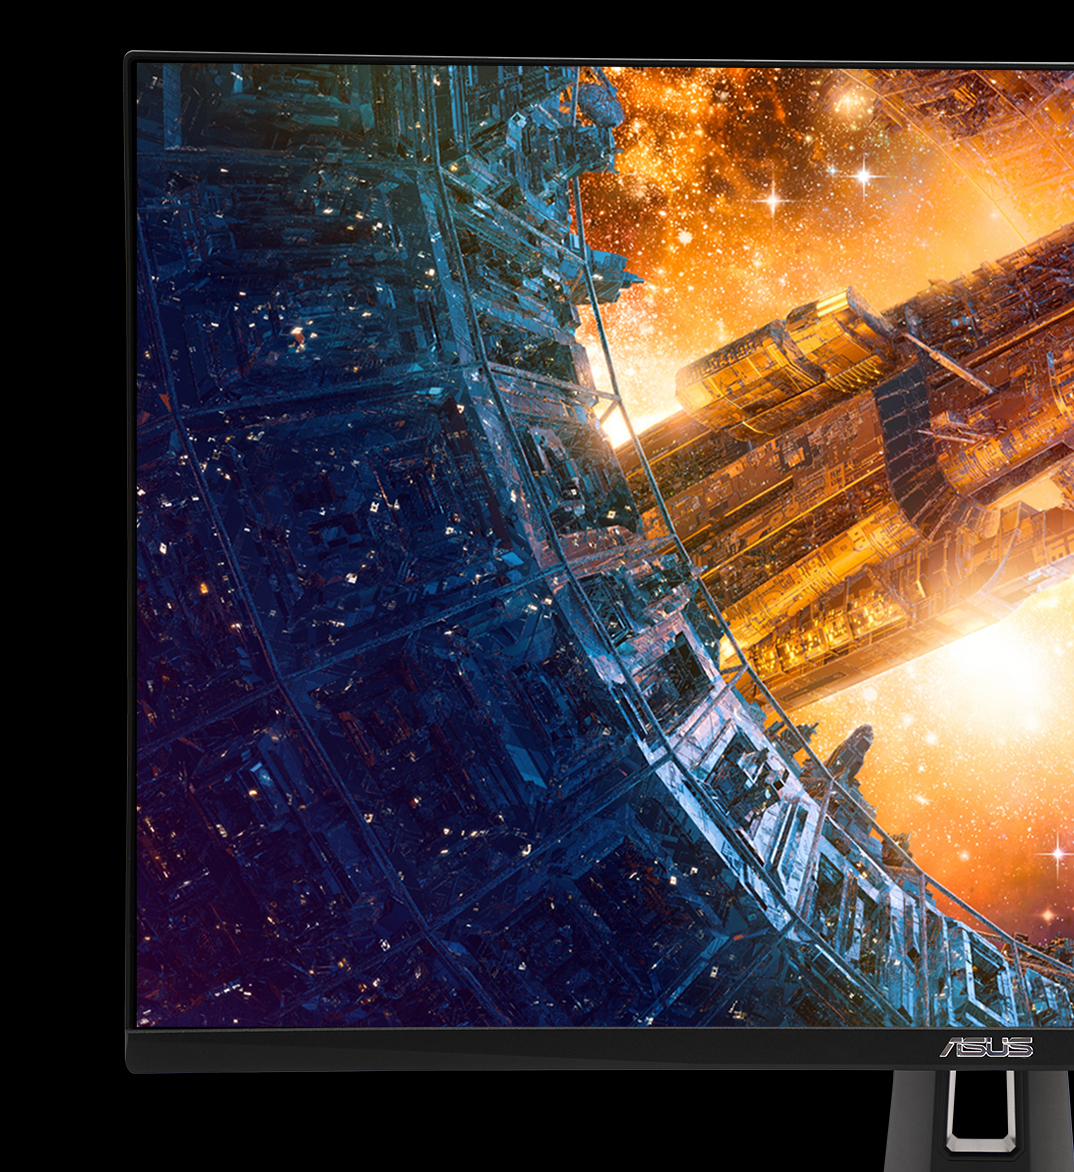 TUF Gaming VG279QM1A takes advantage of HDR technology